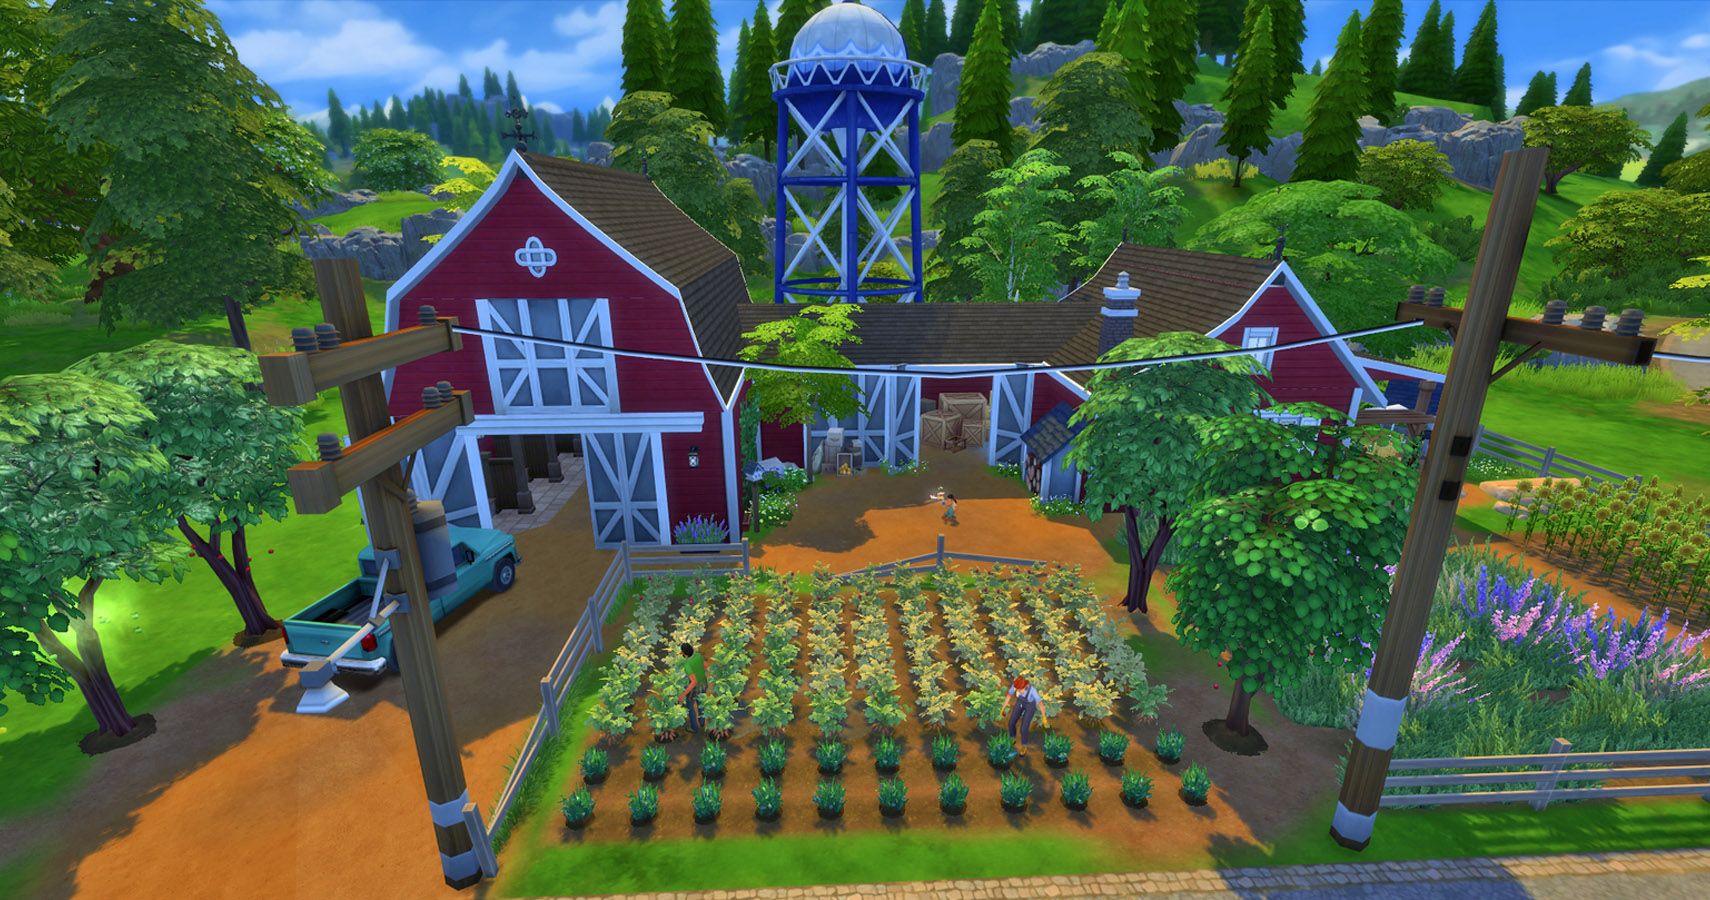 Sims 4 expansion packs ideas acetomar